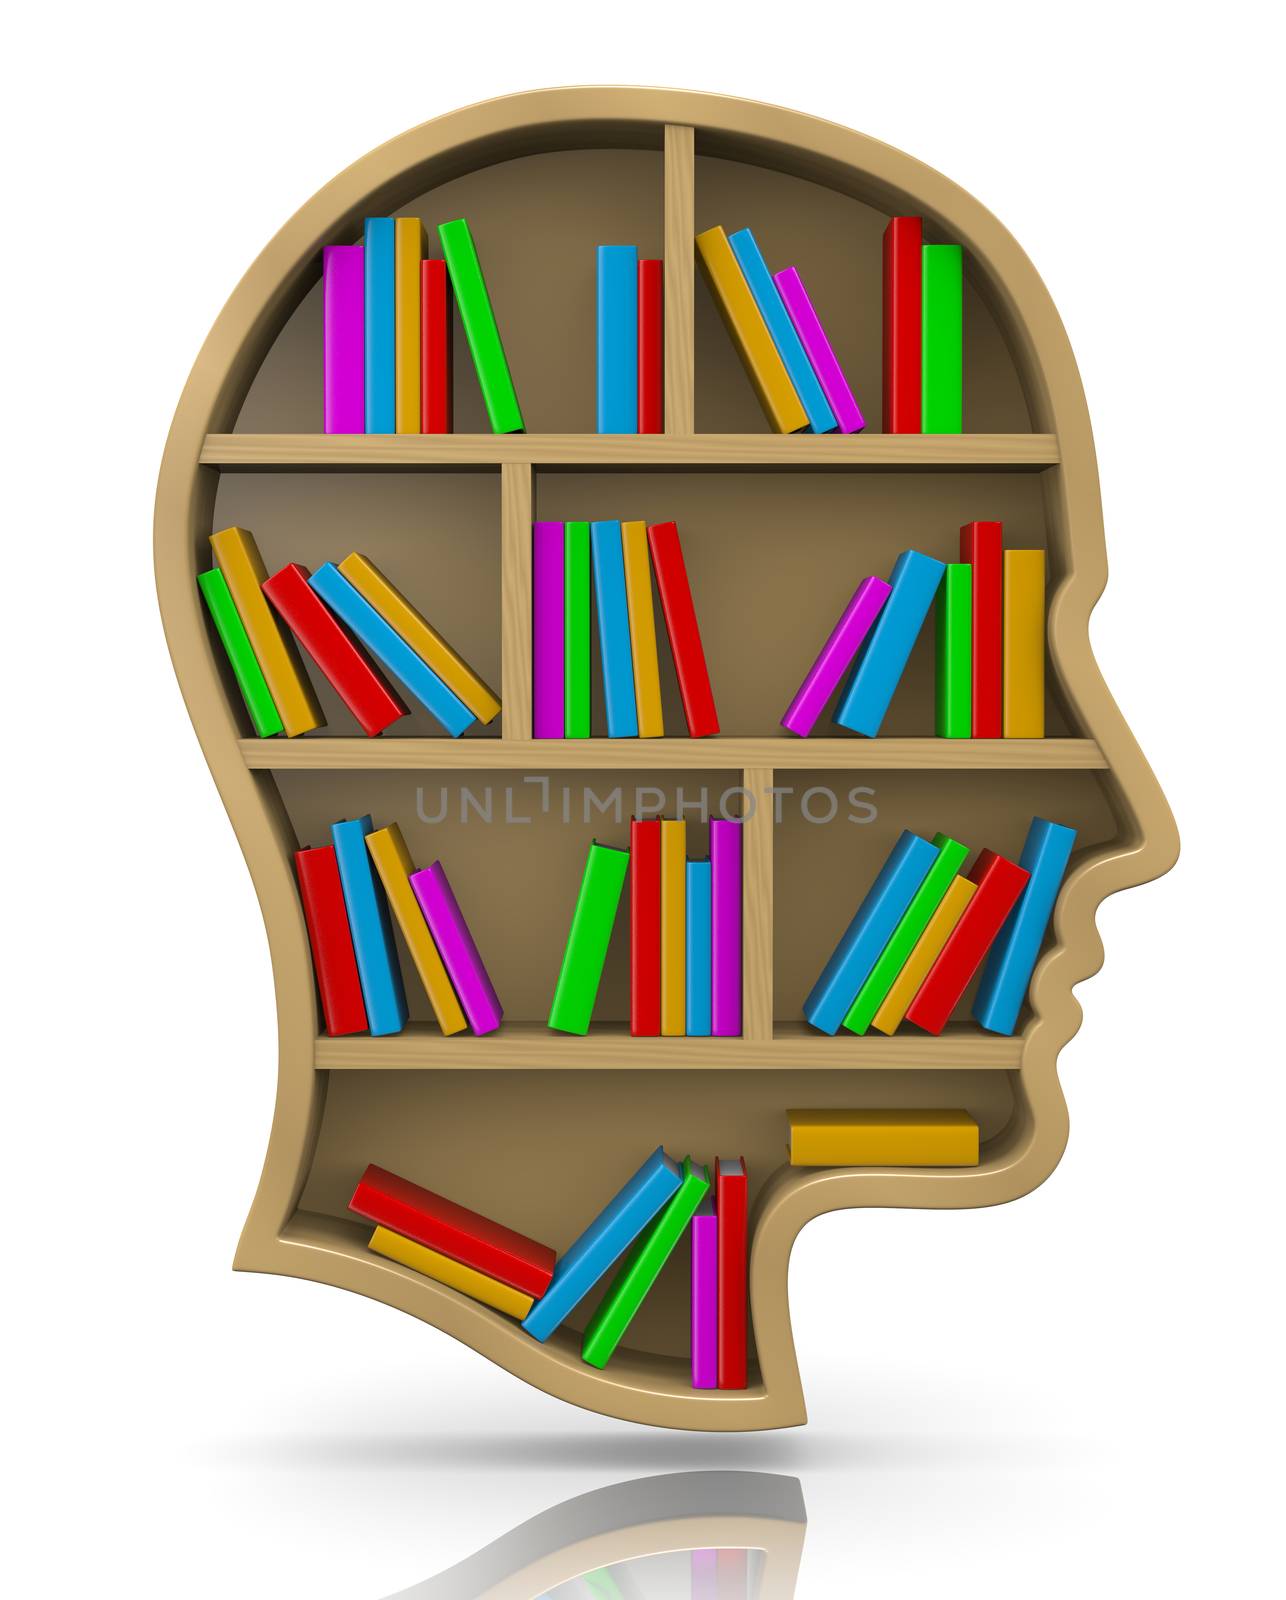 Wood Bookshelf in the Shape of Human Head Illustration, Knowledge Concept